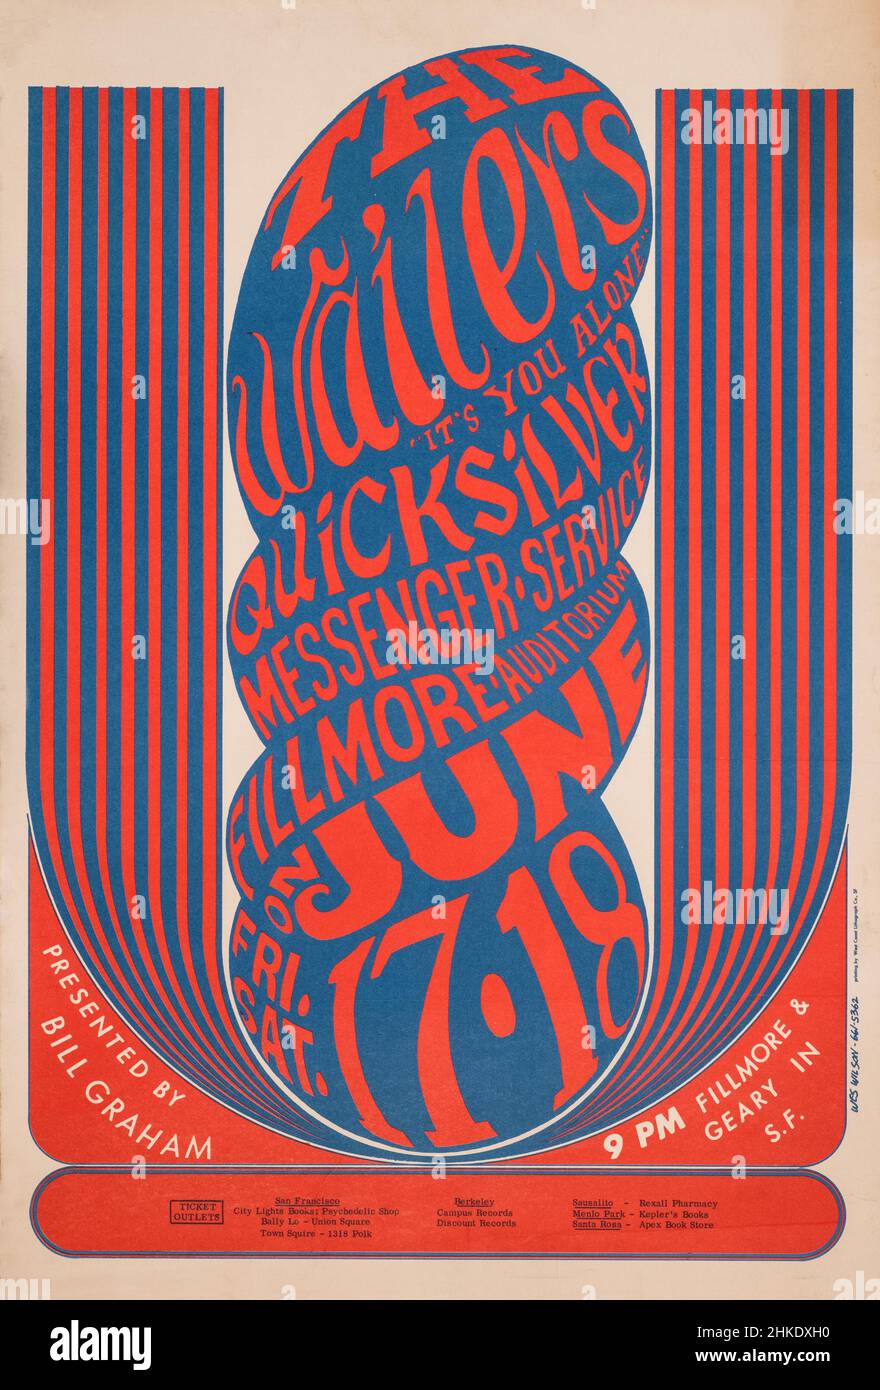 Poster for concerts at the Fillmore Auditorium, San Francisco, in June 1966. Stock Photo